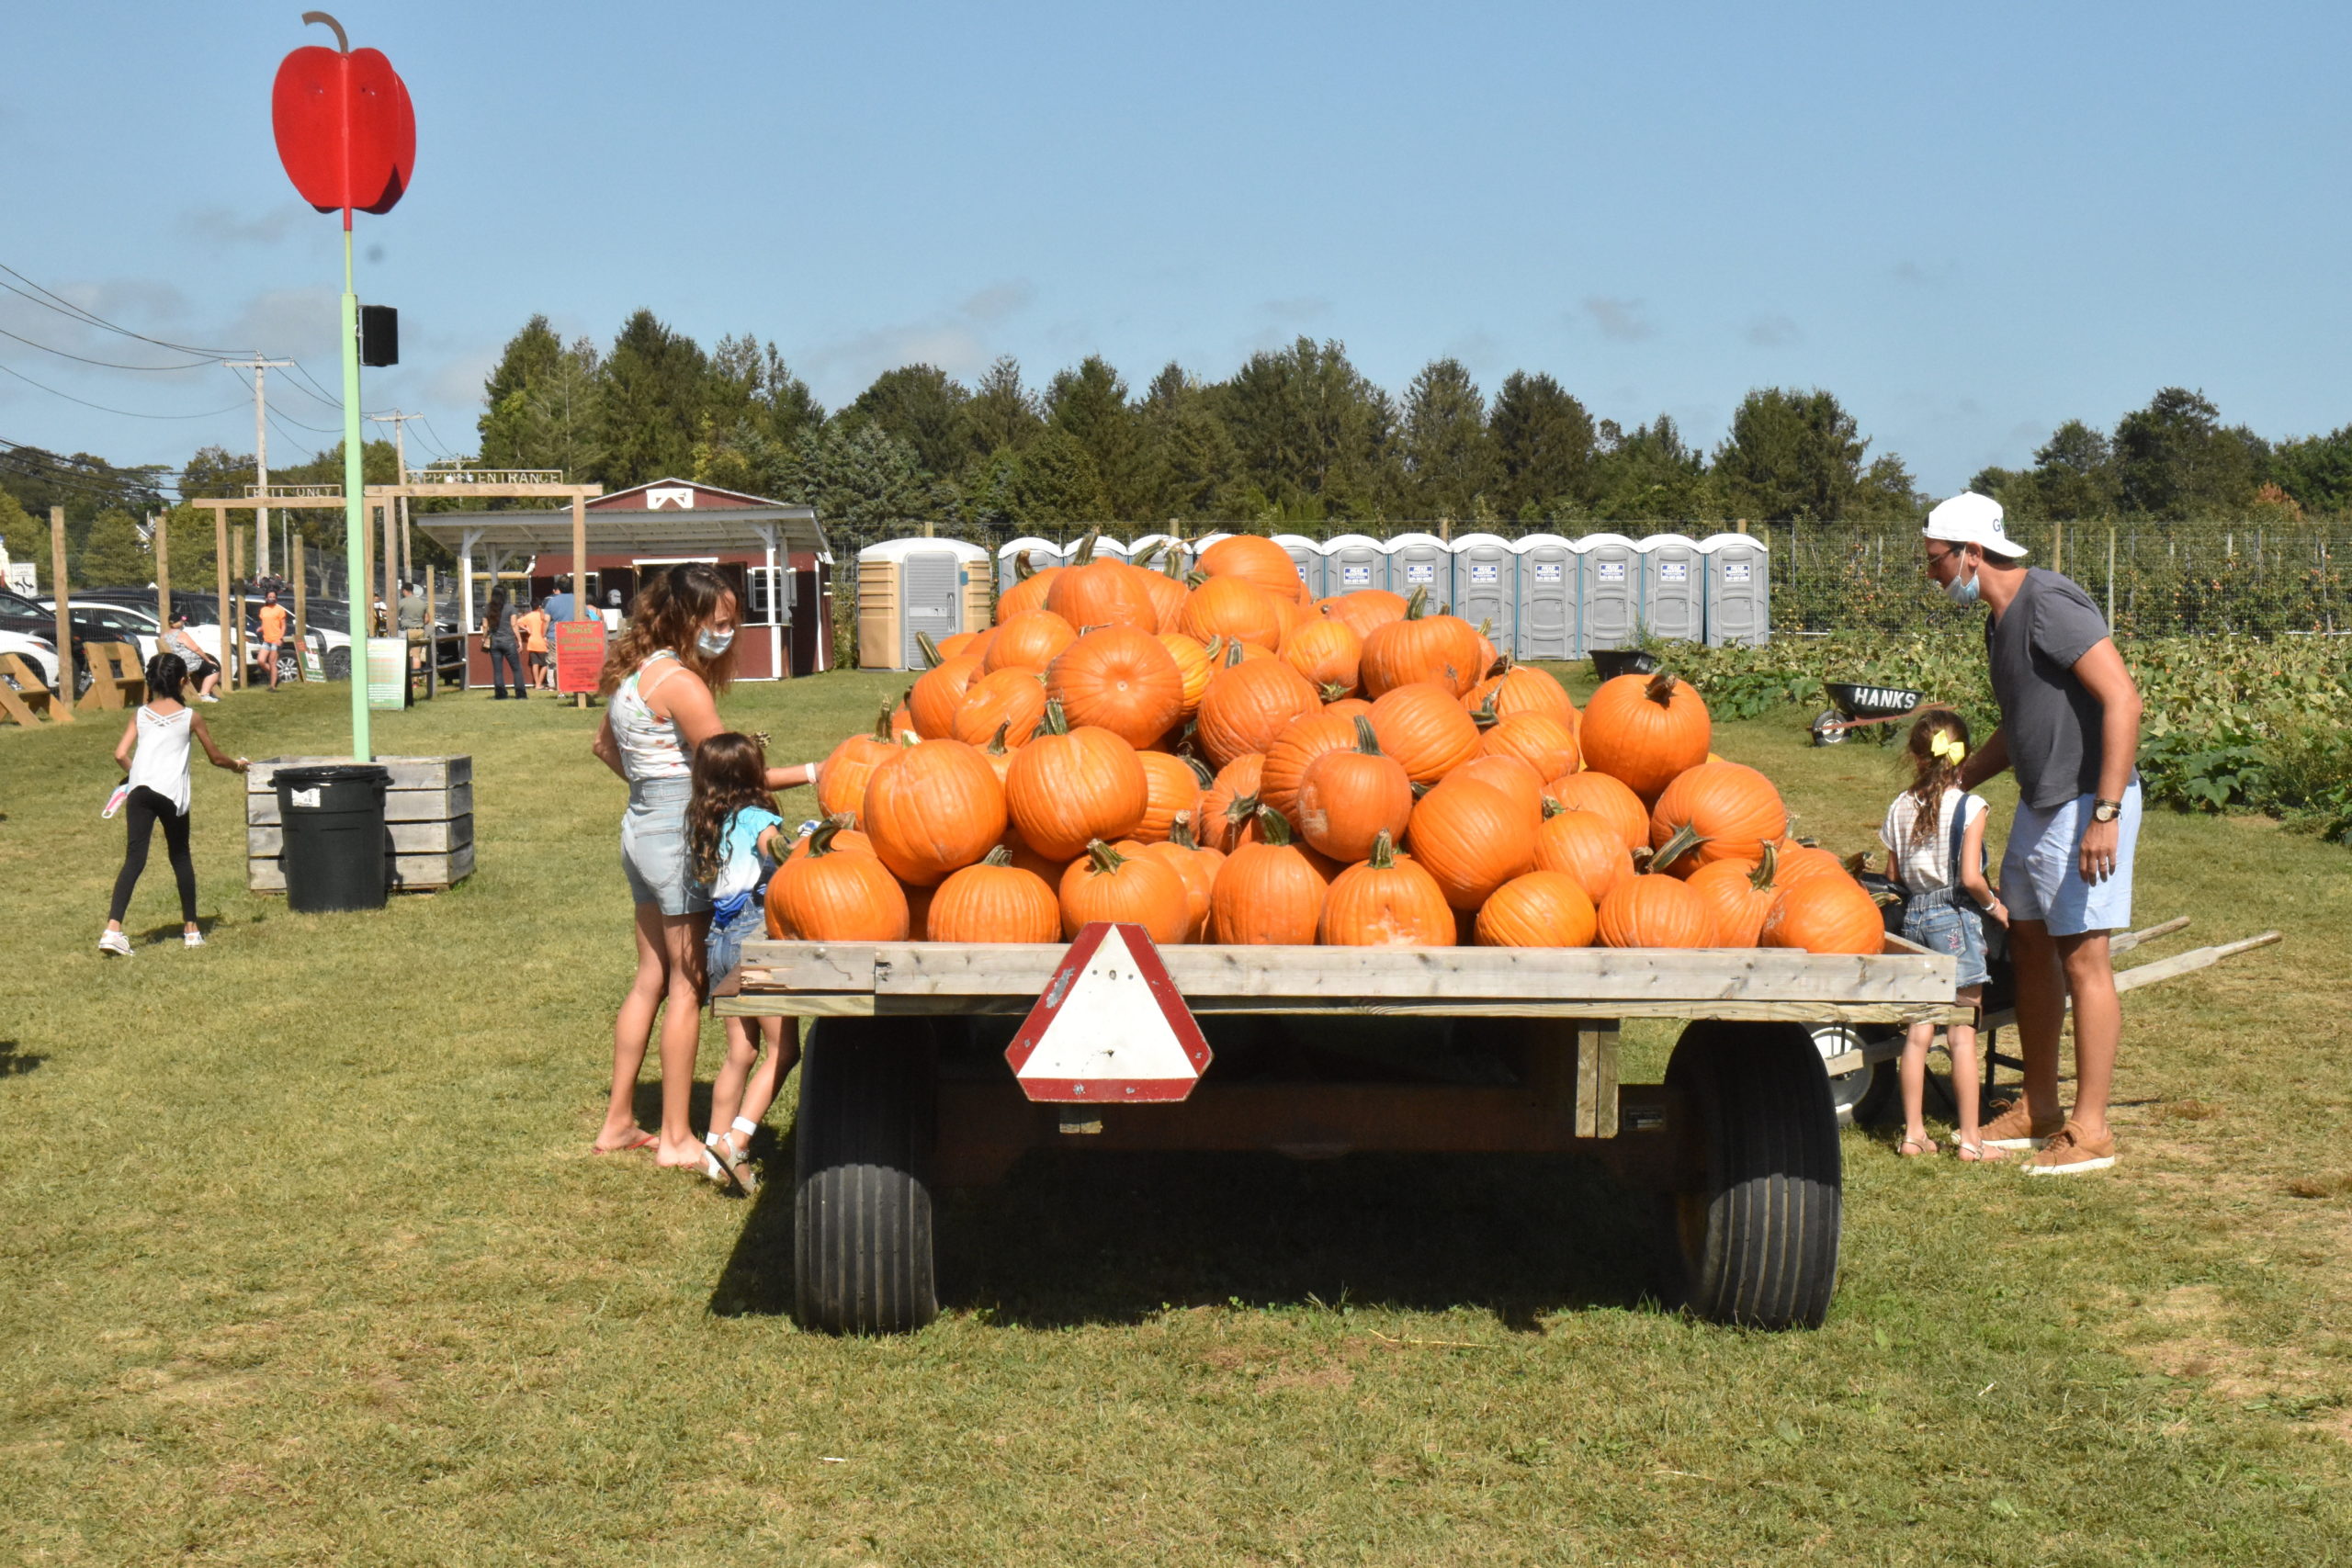 A family searches for the perfect pumpkin at Hank's PumpkinTown in Water Mill on Sunday. STEPHEN J. KOTZ